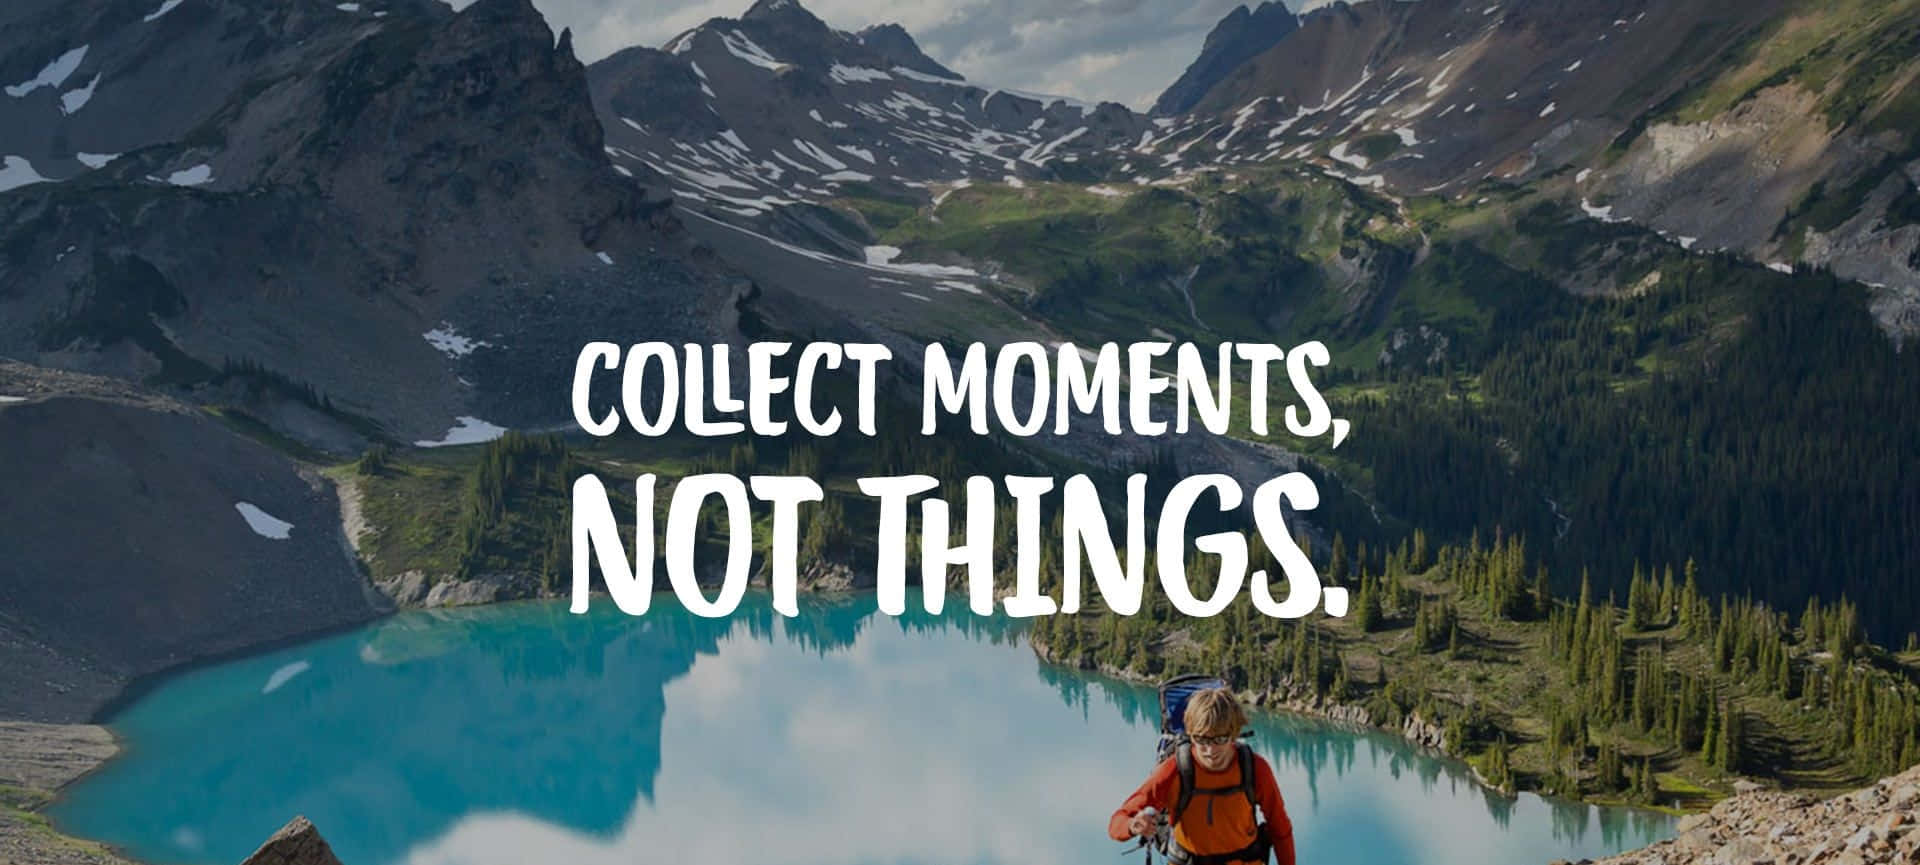 Collect Moments Not Things_ Travel Quote Wallpaper